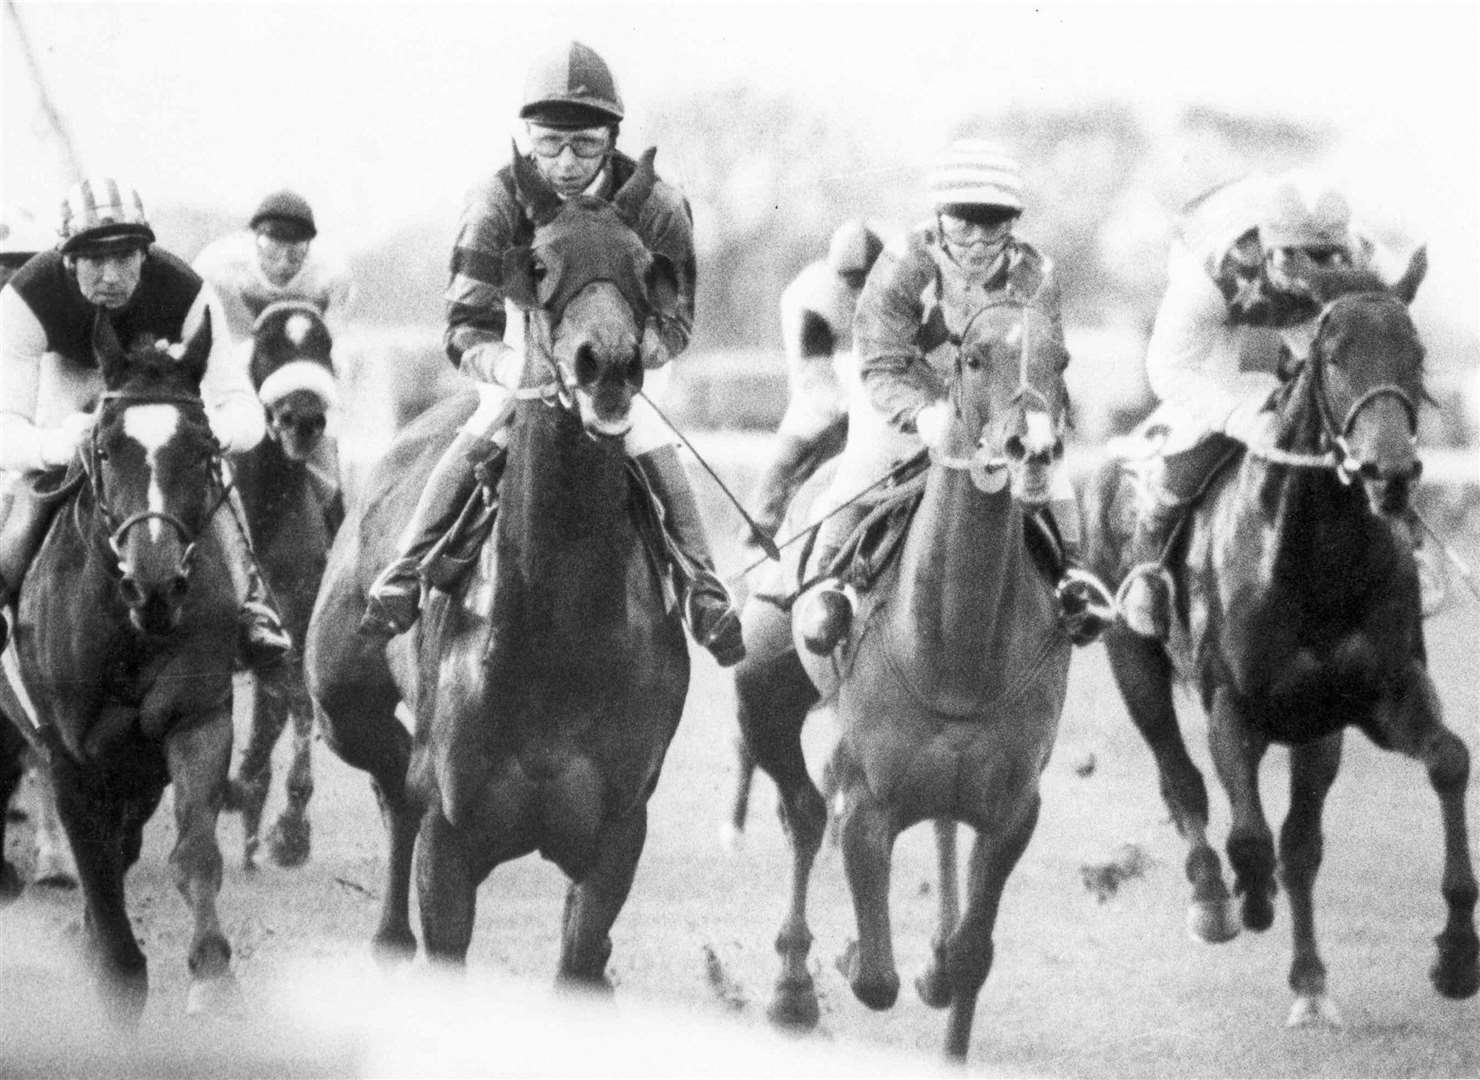 November 1986: Princess Anne rode 'Glowing Promise' in the 3pm Leeds Amateur Riders' Stakes, finishing third